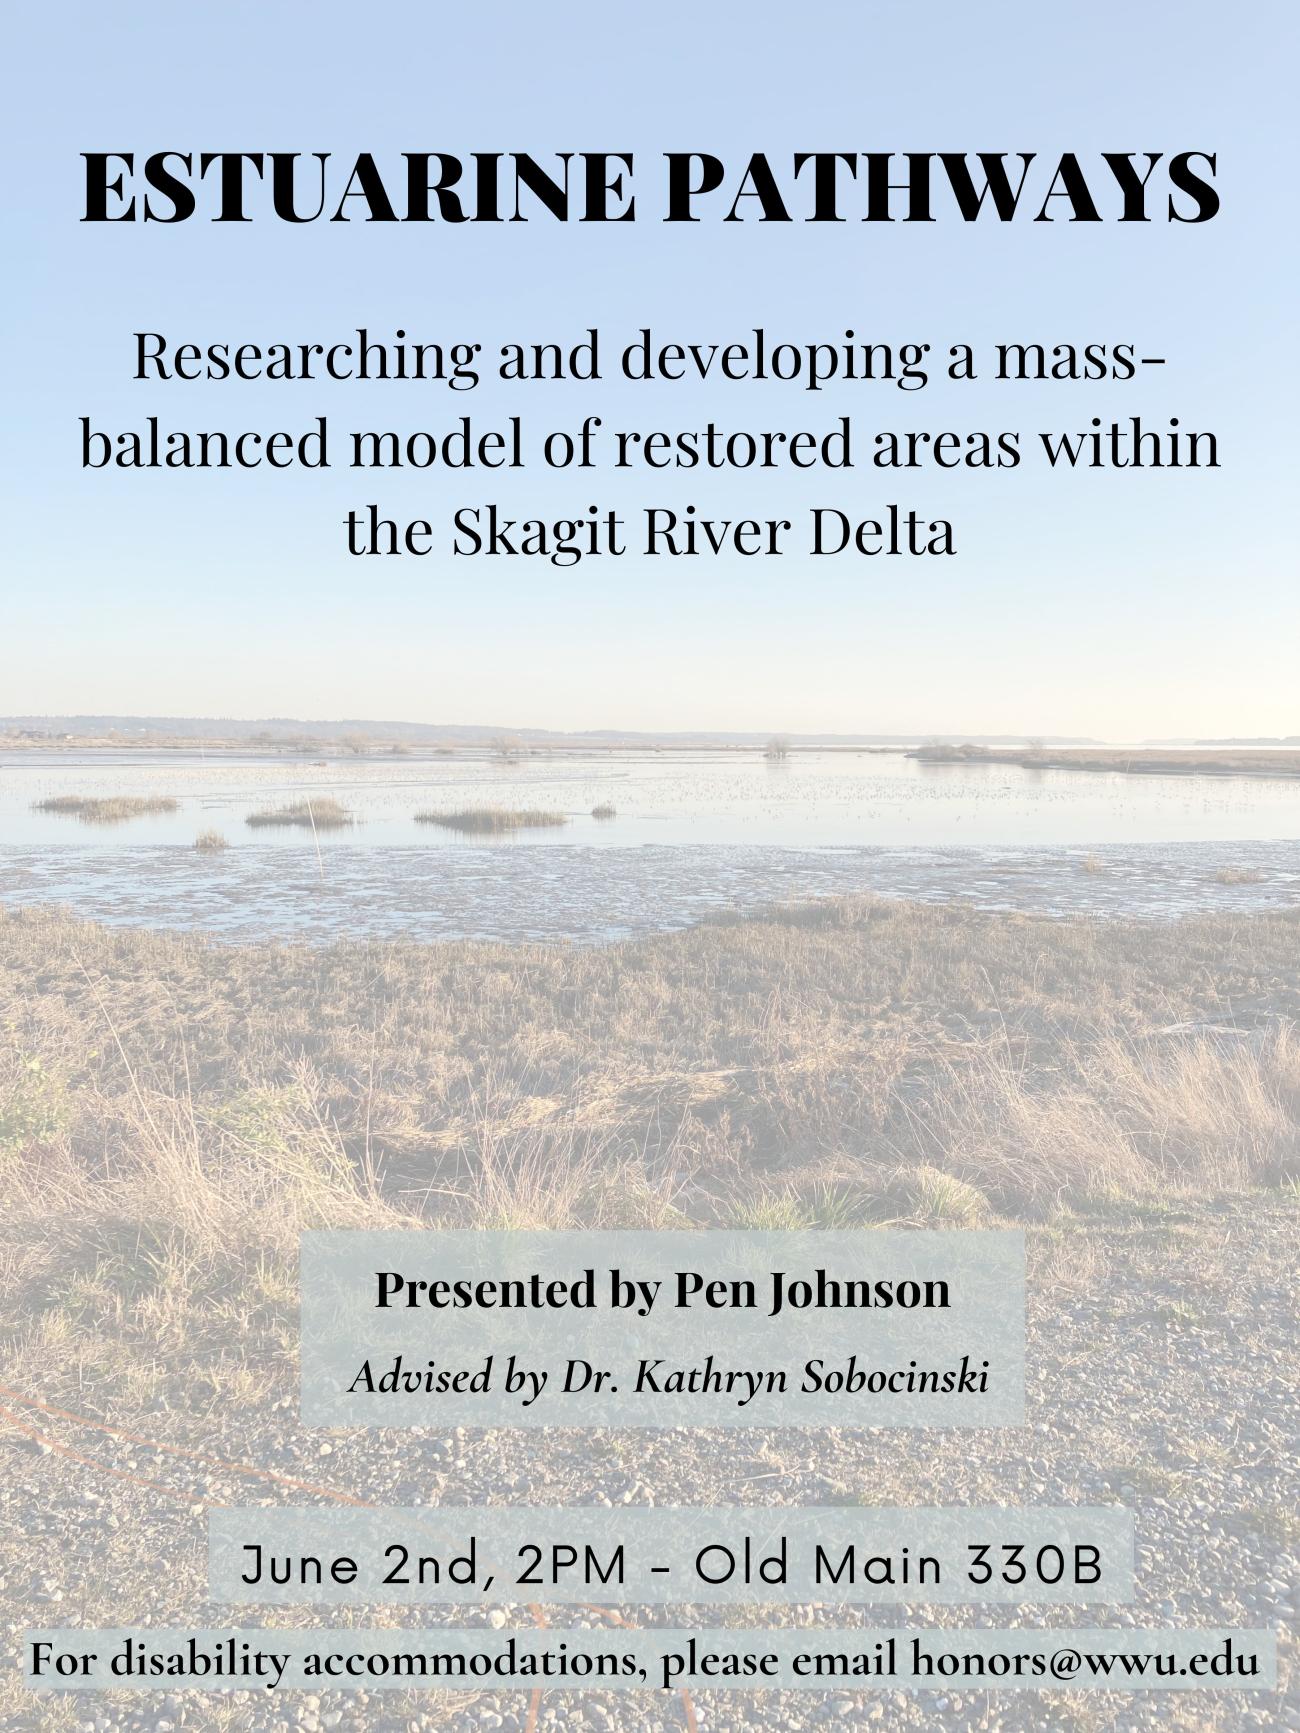 A poster with a background depicting a faded estuary. The text on the top center reads, “Estuarine Pathways, Researching and developing a mass-balanced model of restored areas within the Skagit River Delta”. Text on a grey rectangle on the bottom center reads, “Presented by Pen Johnson, Advised by Dr. Kathryn Sobocinski”. Underneath this text is a date and time “June 2nd, 2PM in Old Main 330B” followed by text that reads, “For disability accommodations, please email honors@wwu.edu”